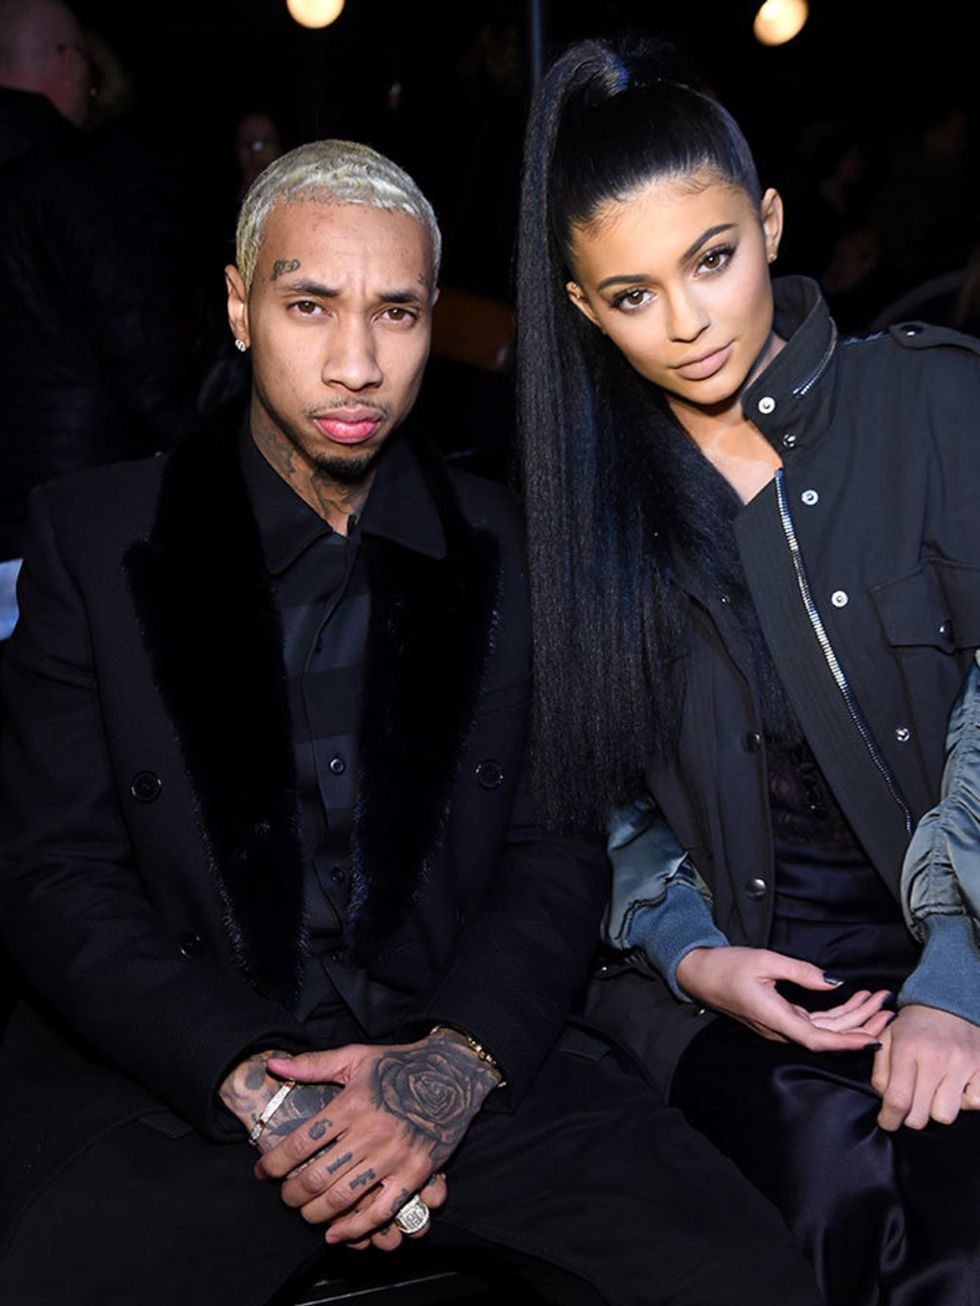 Tyga and Kylie Jenner at the Alexander Wang show in New York, February 2016.